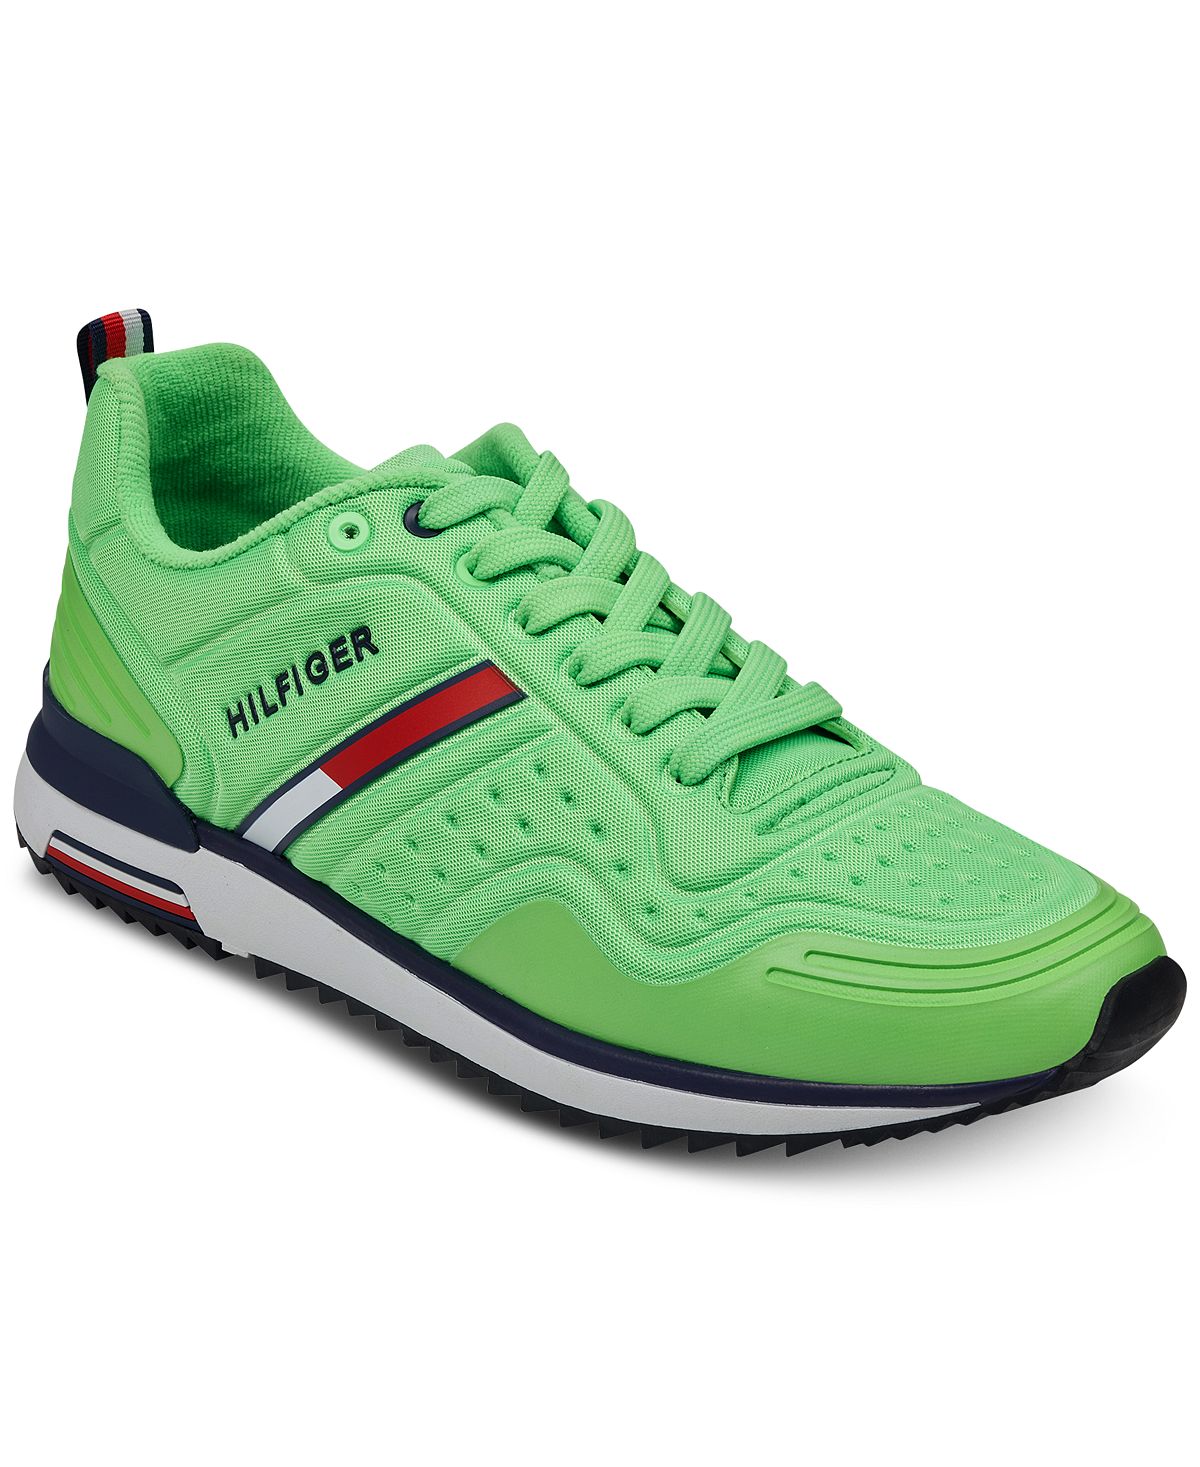 Tommy Hilfiger Vion Sneakers Green